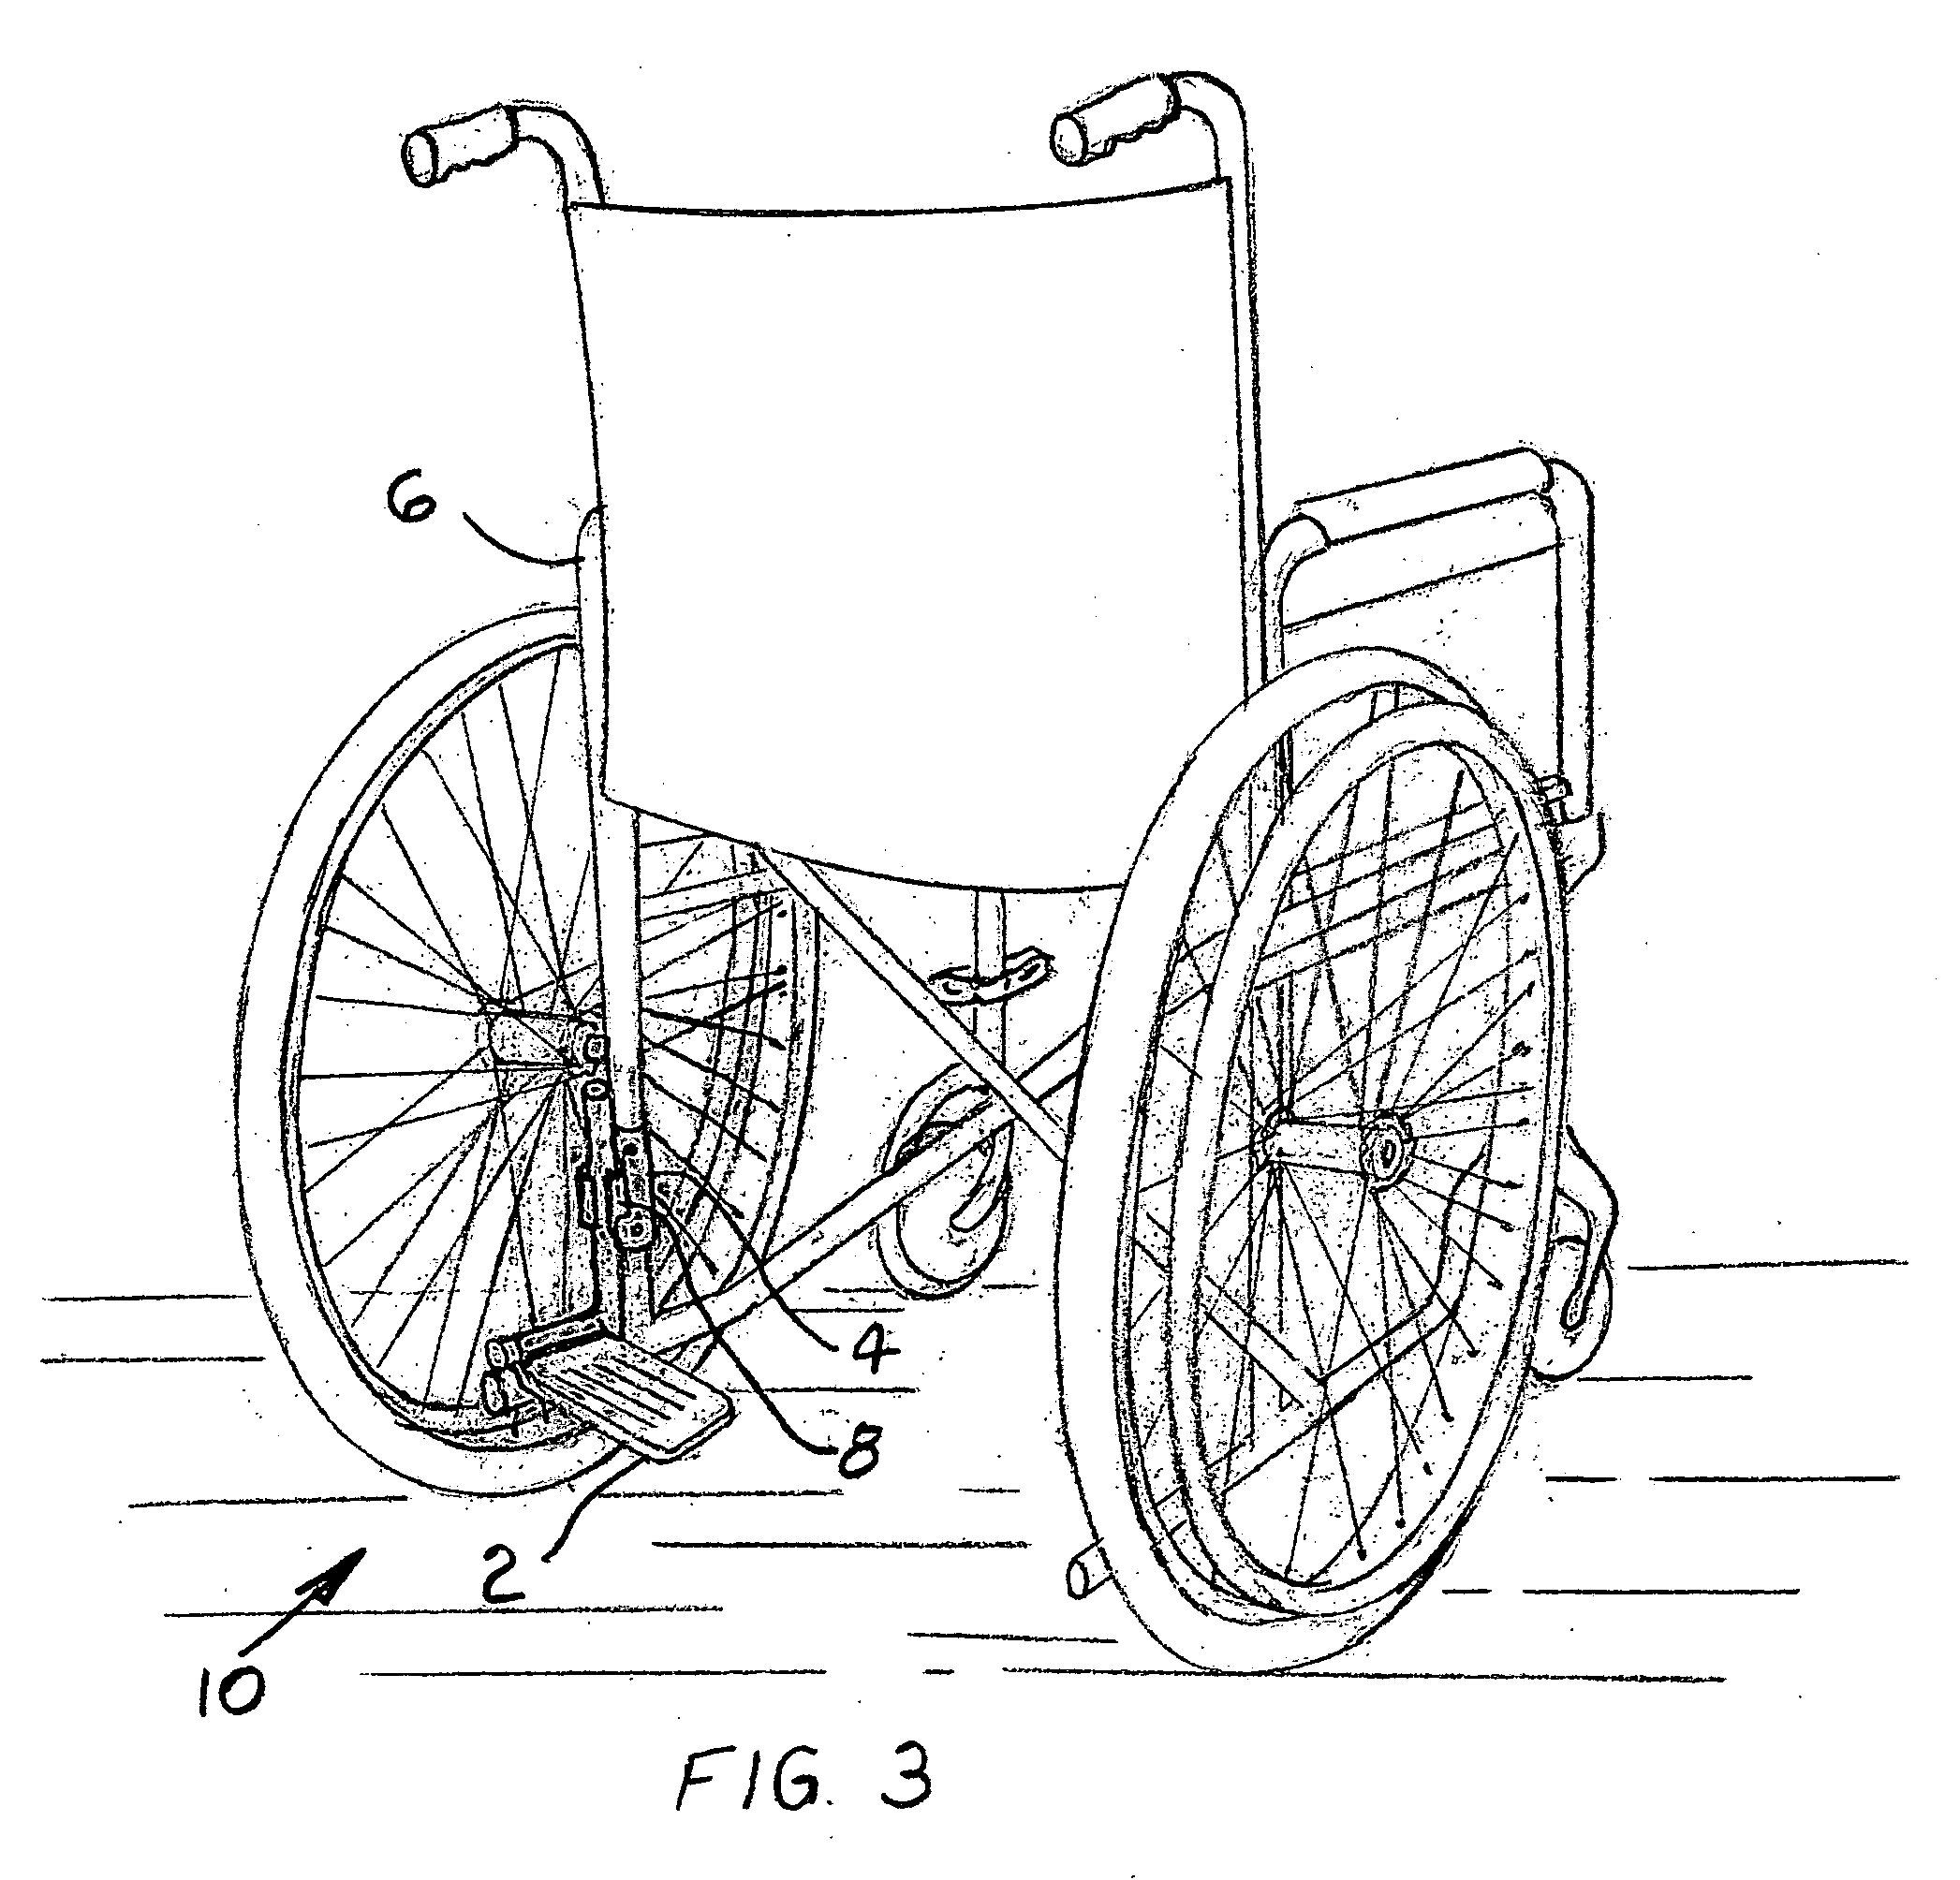 Foot rest holder for wheelchairs